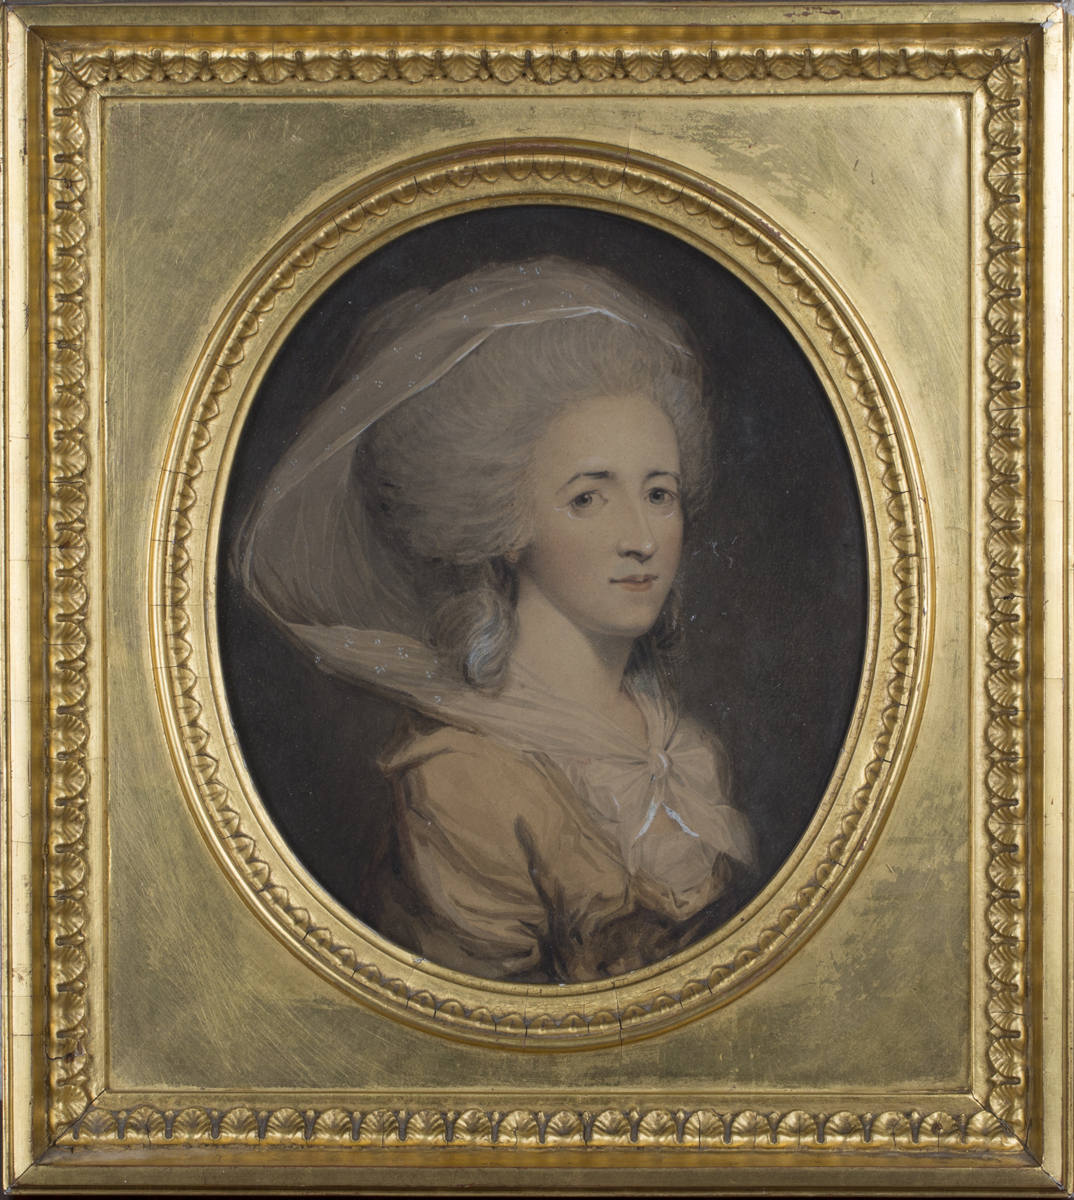 British School - Oval Head and Shoulders Portrait of a Lady wearing a Head Scarf, early 19th century